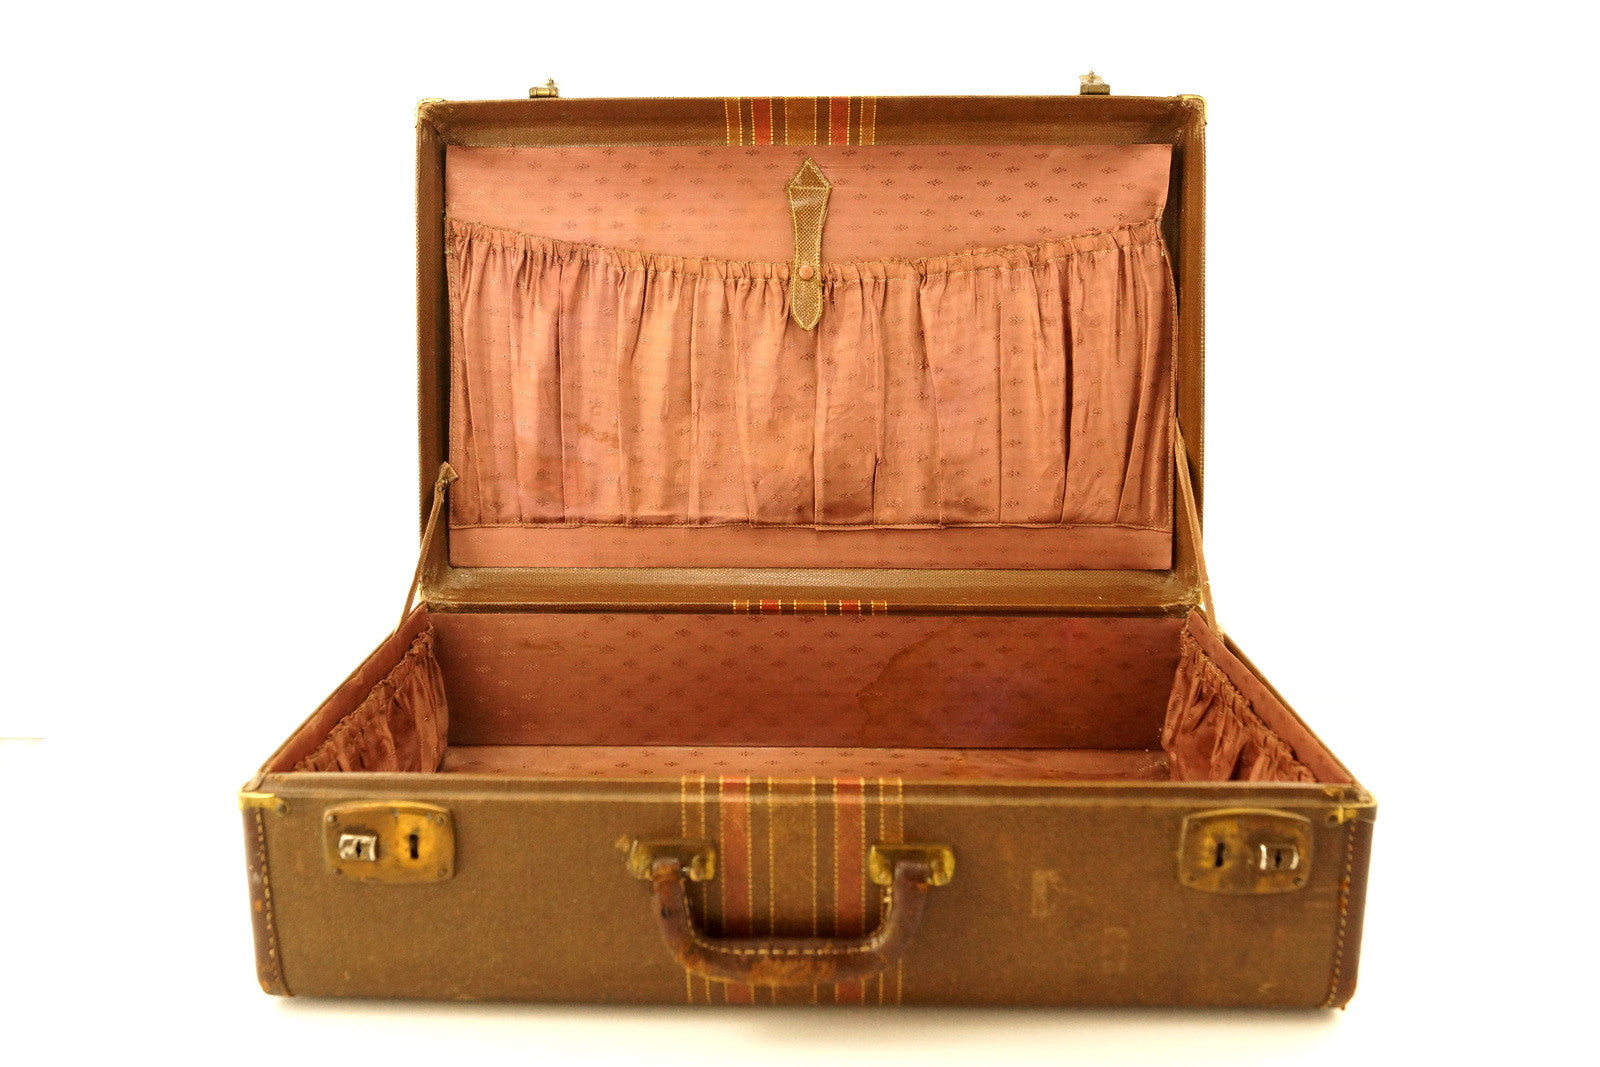 Vintage Tweed Hard Sided Suitcase with Leather Edges and Handle (c